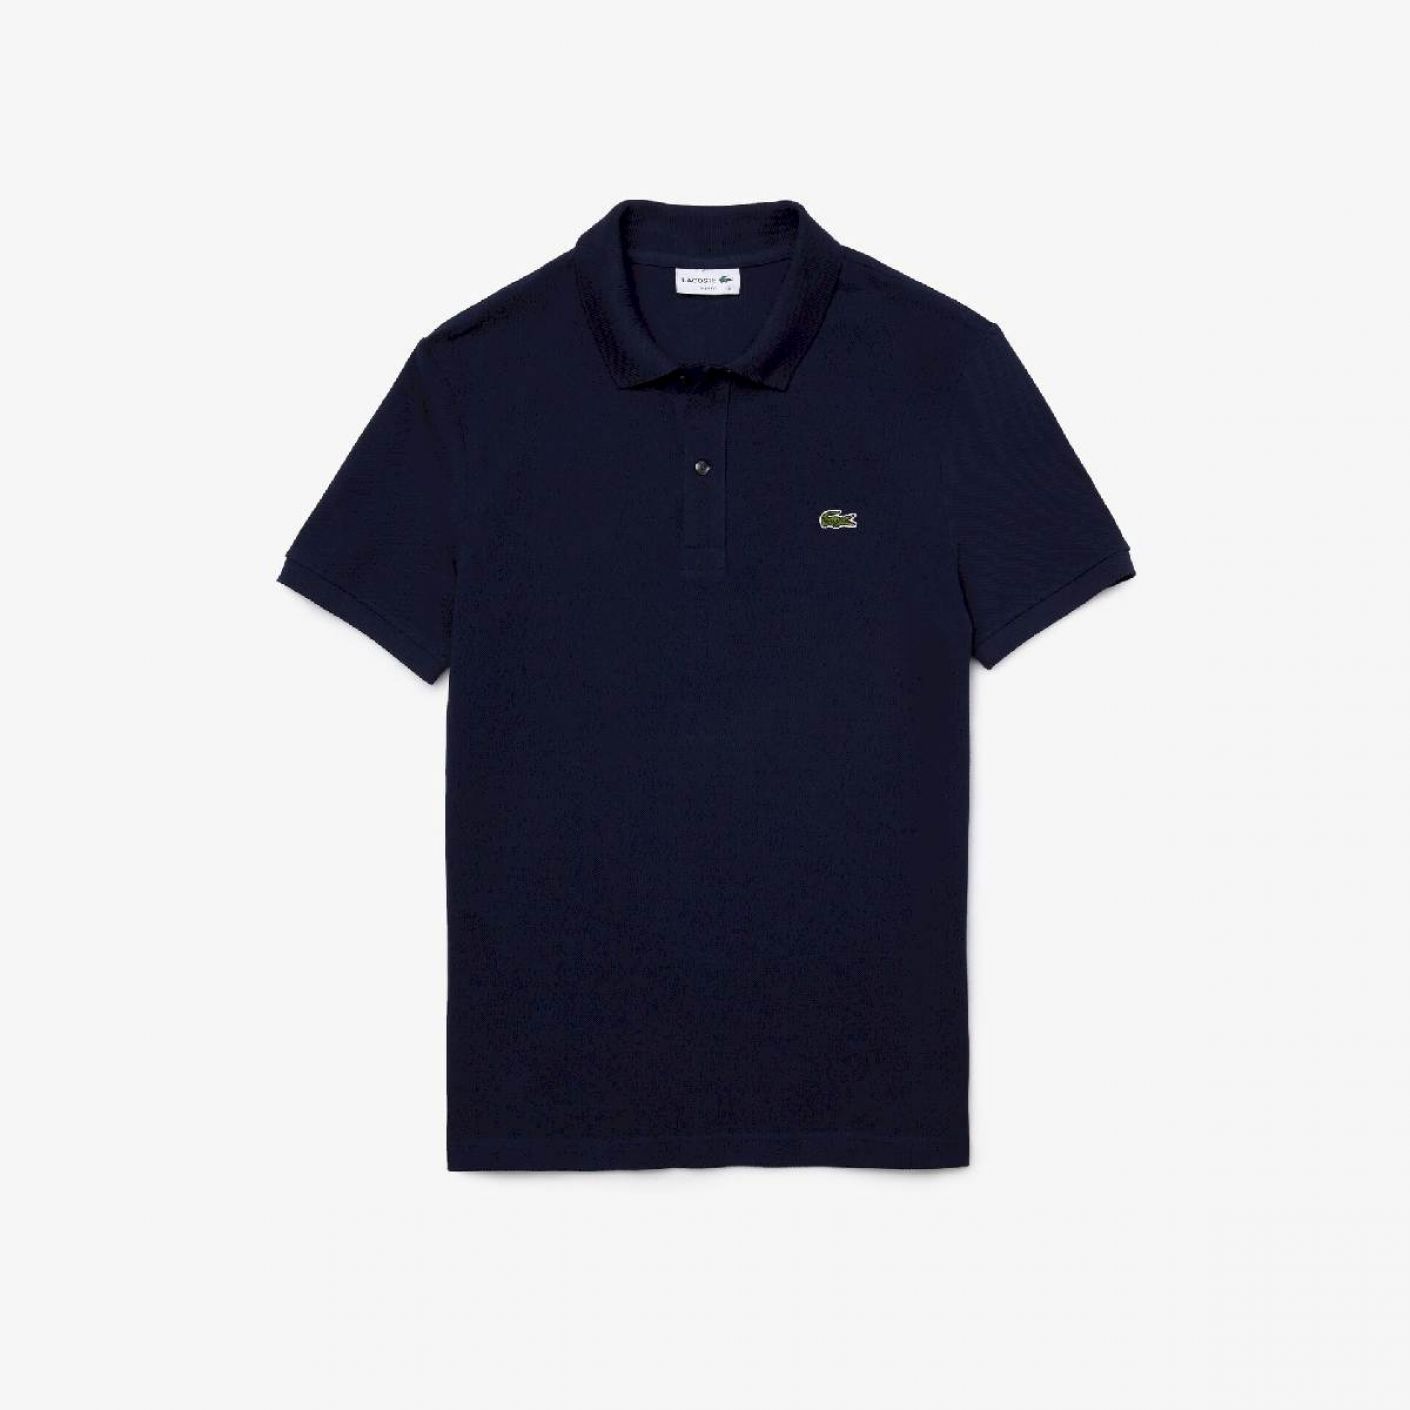 Lacoste Polo Slim Fit Navy Blue